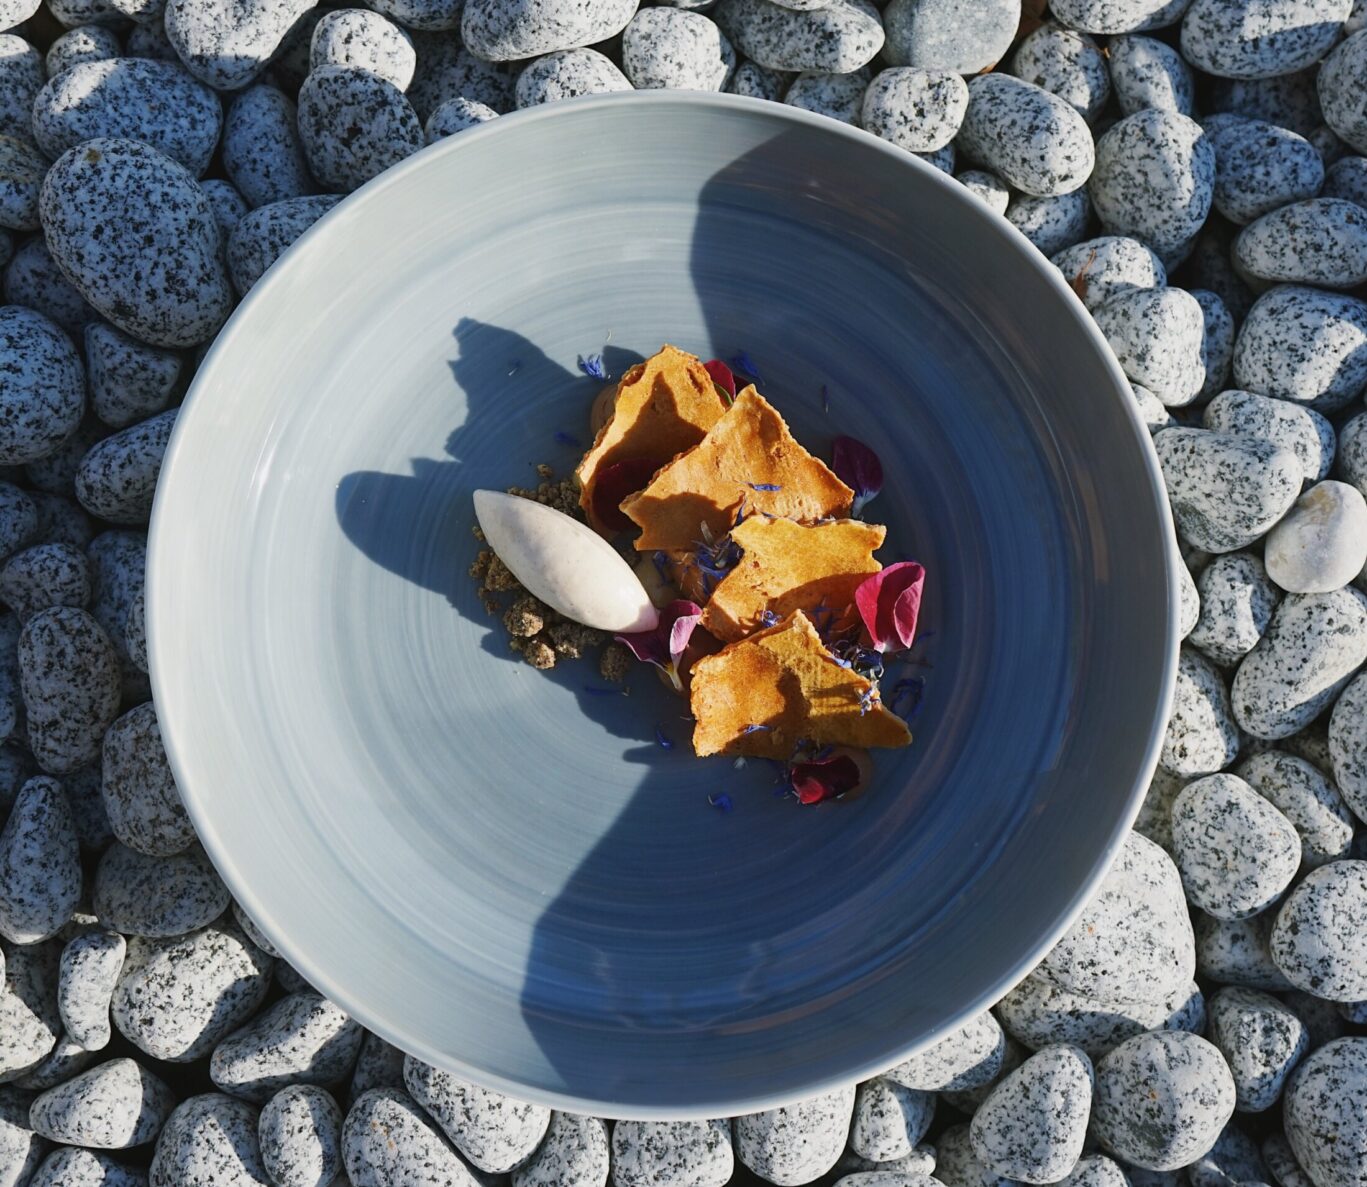 Dessert plated in bowl on pebbles